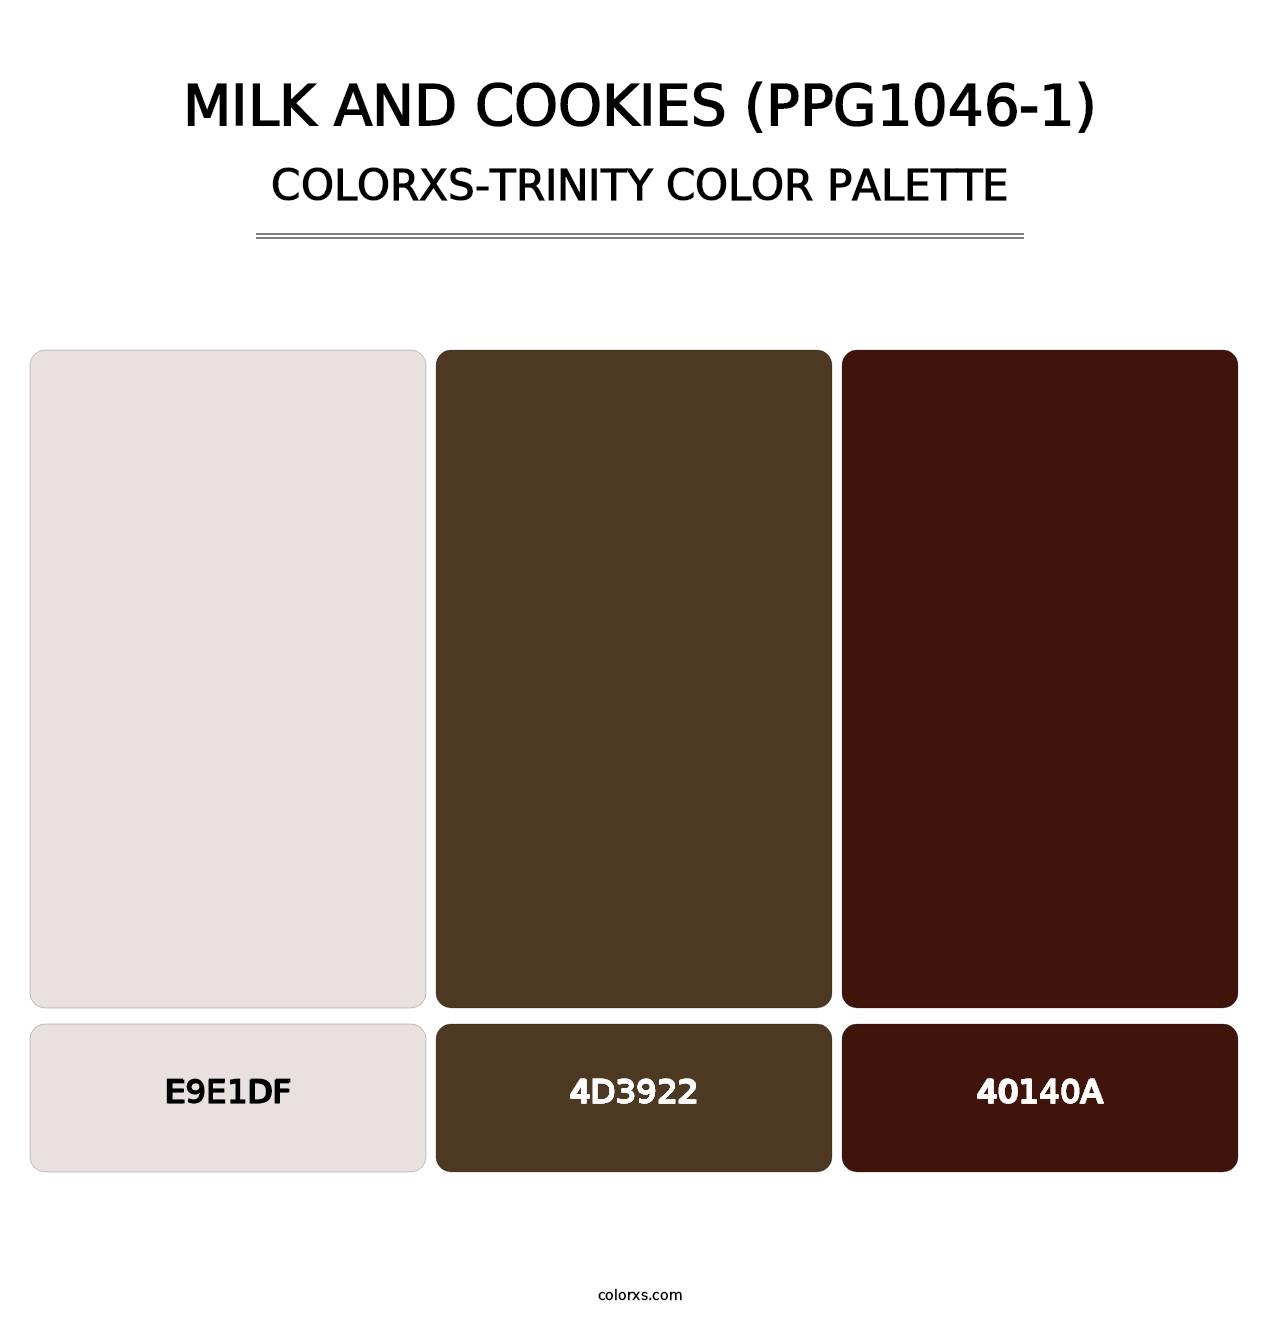 Milk And Cookies (PPG1046-1) - Colorxs Trinity Palette